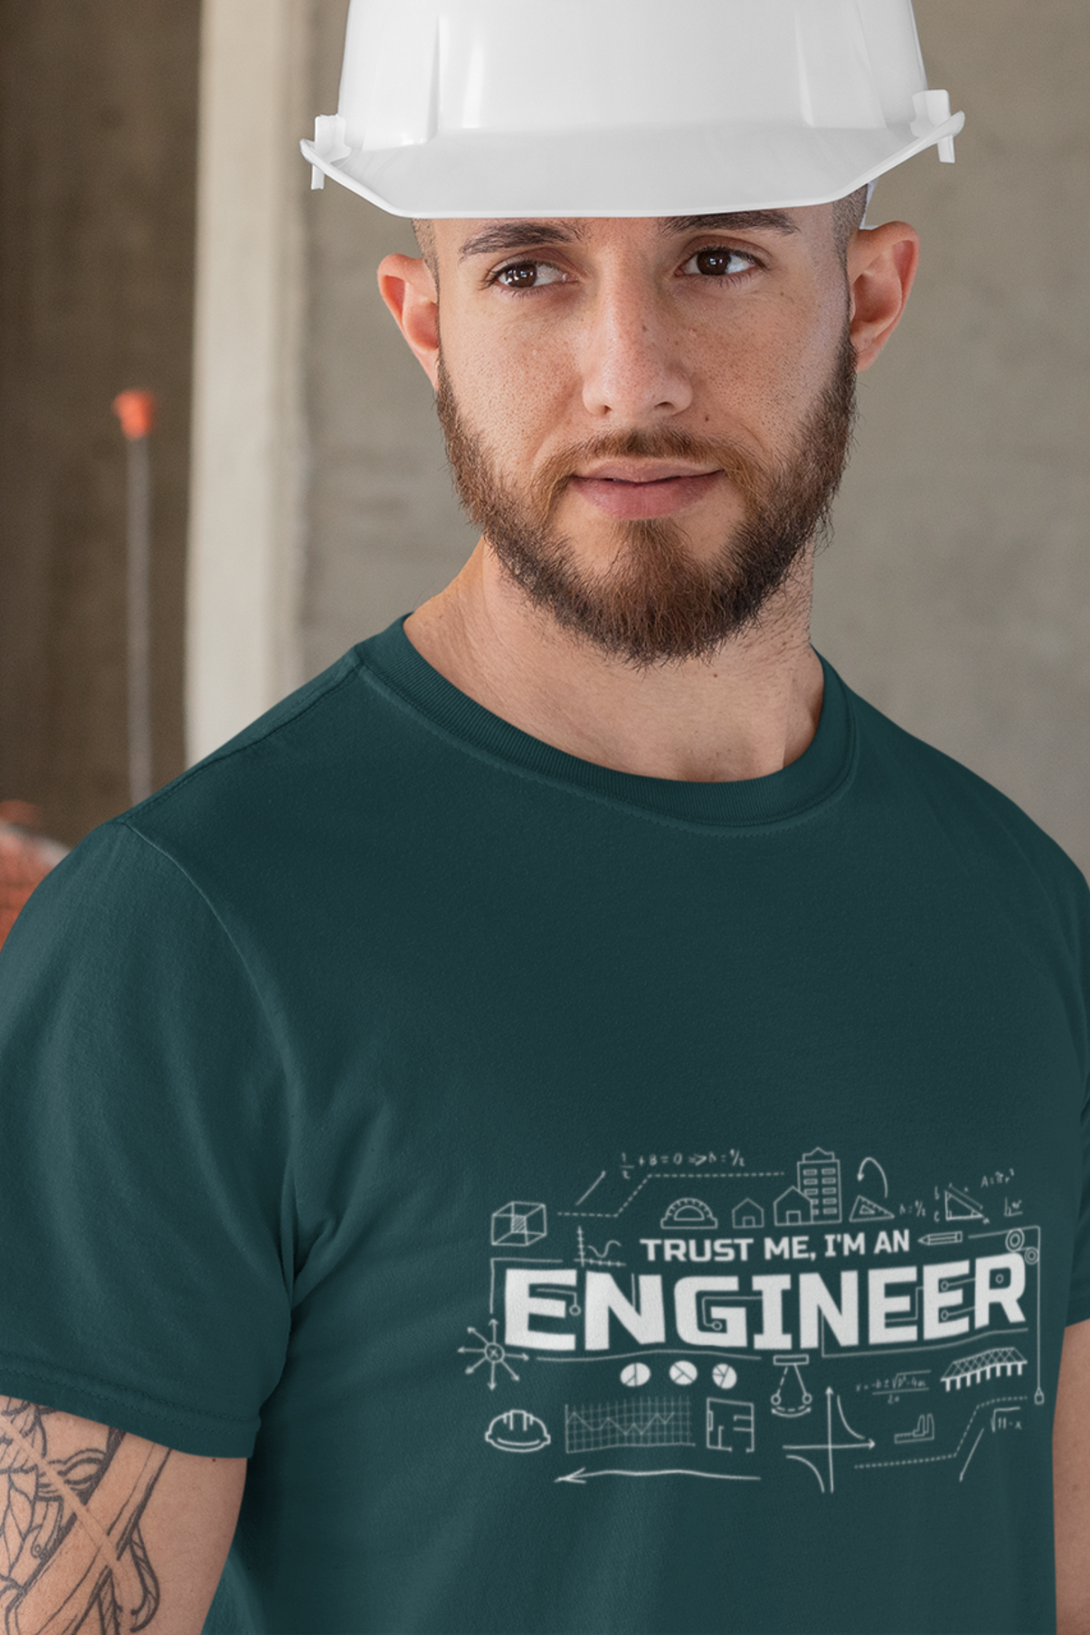 Trust Me, I'M An Engineer Printed T-Shirt For Men - WowWaves - 2